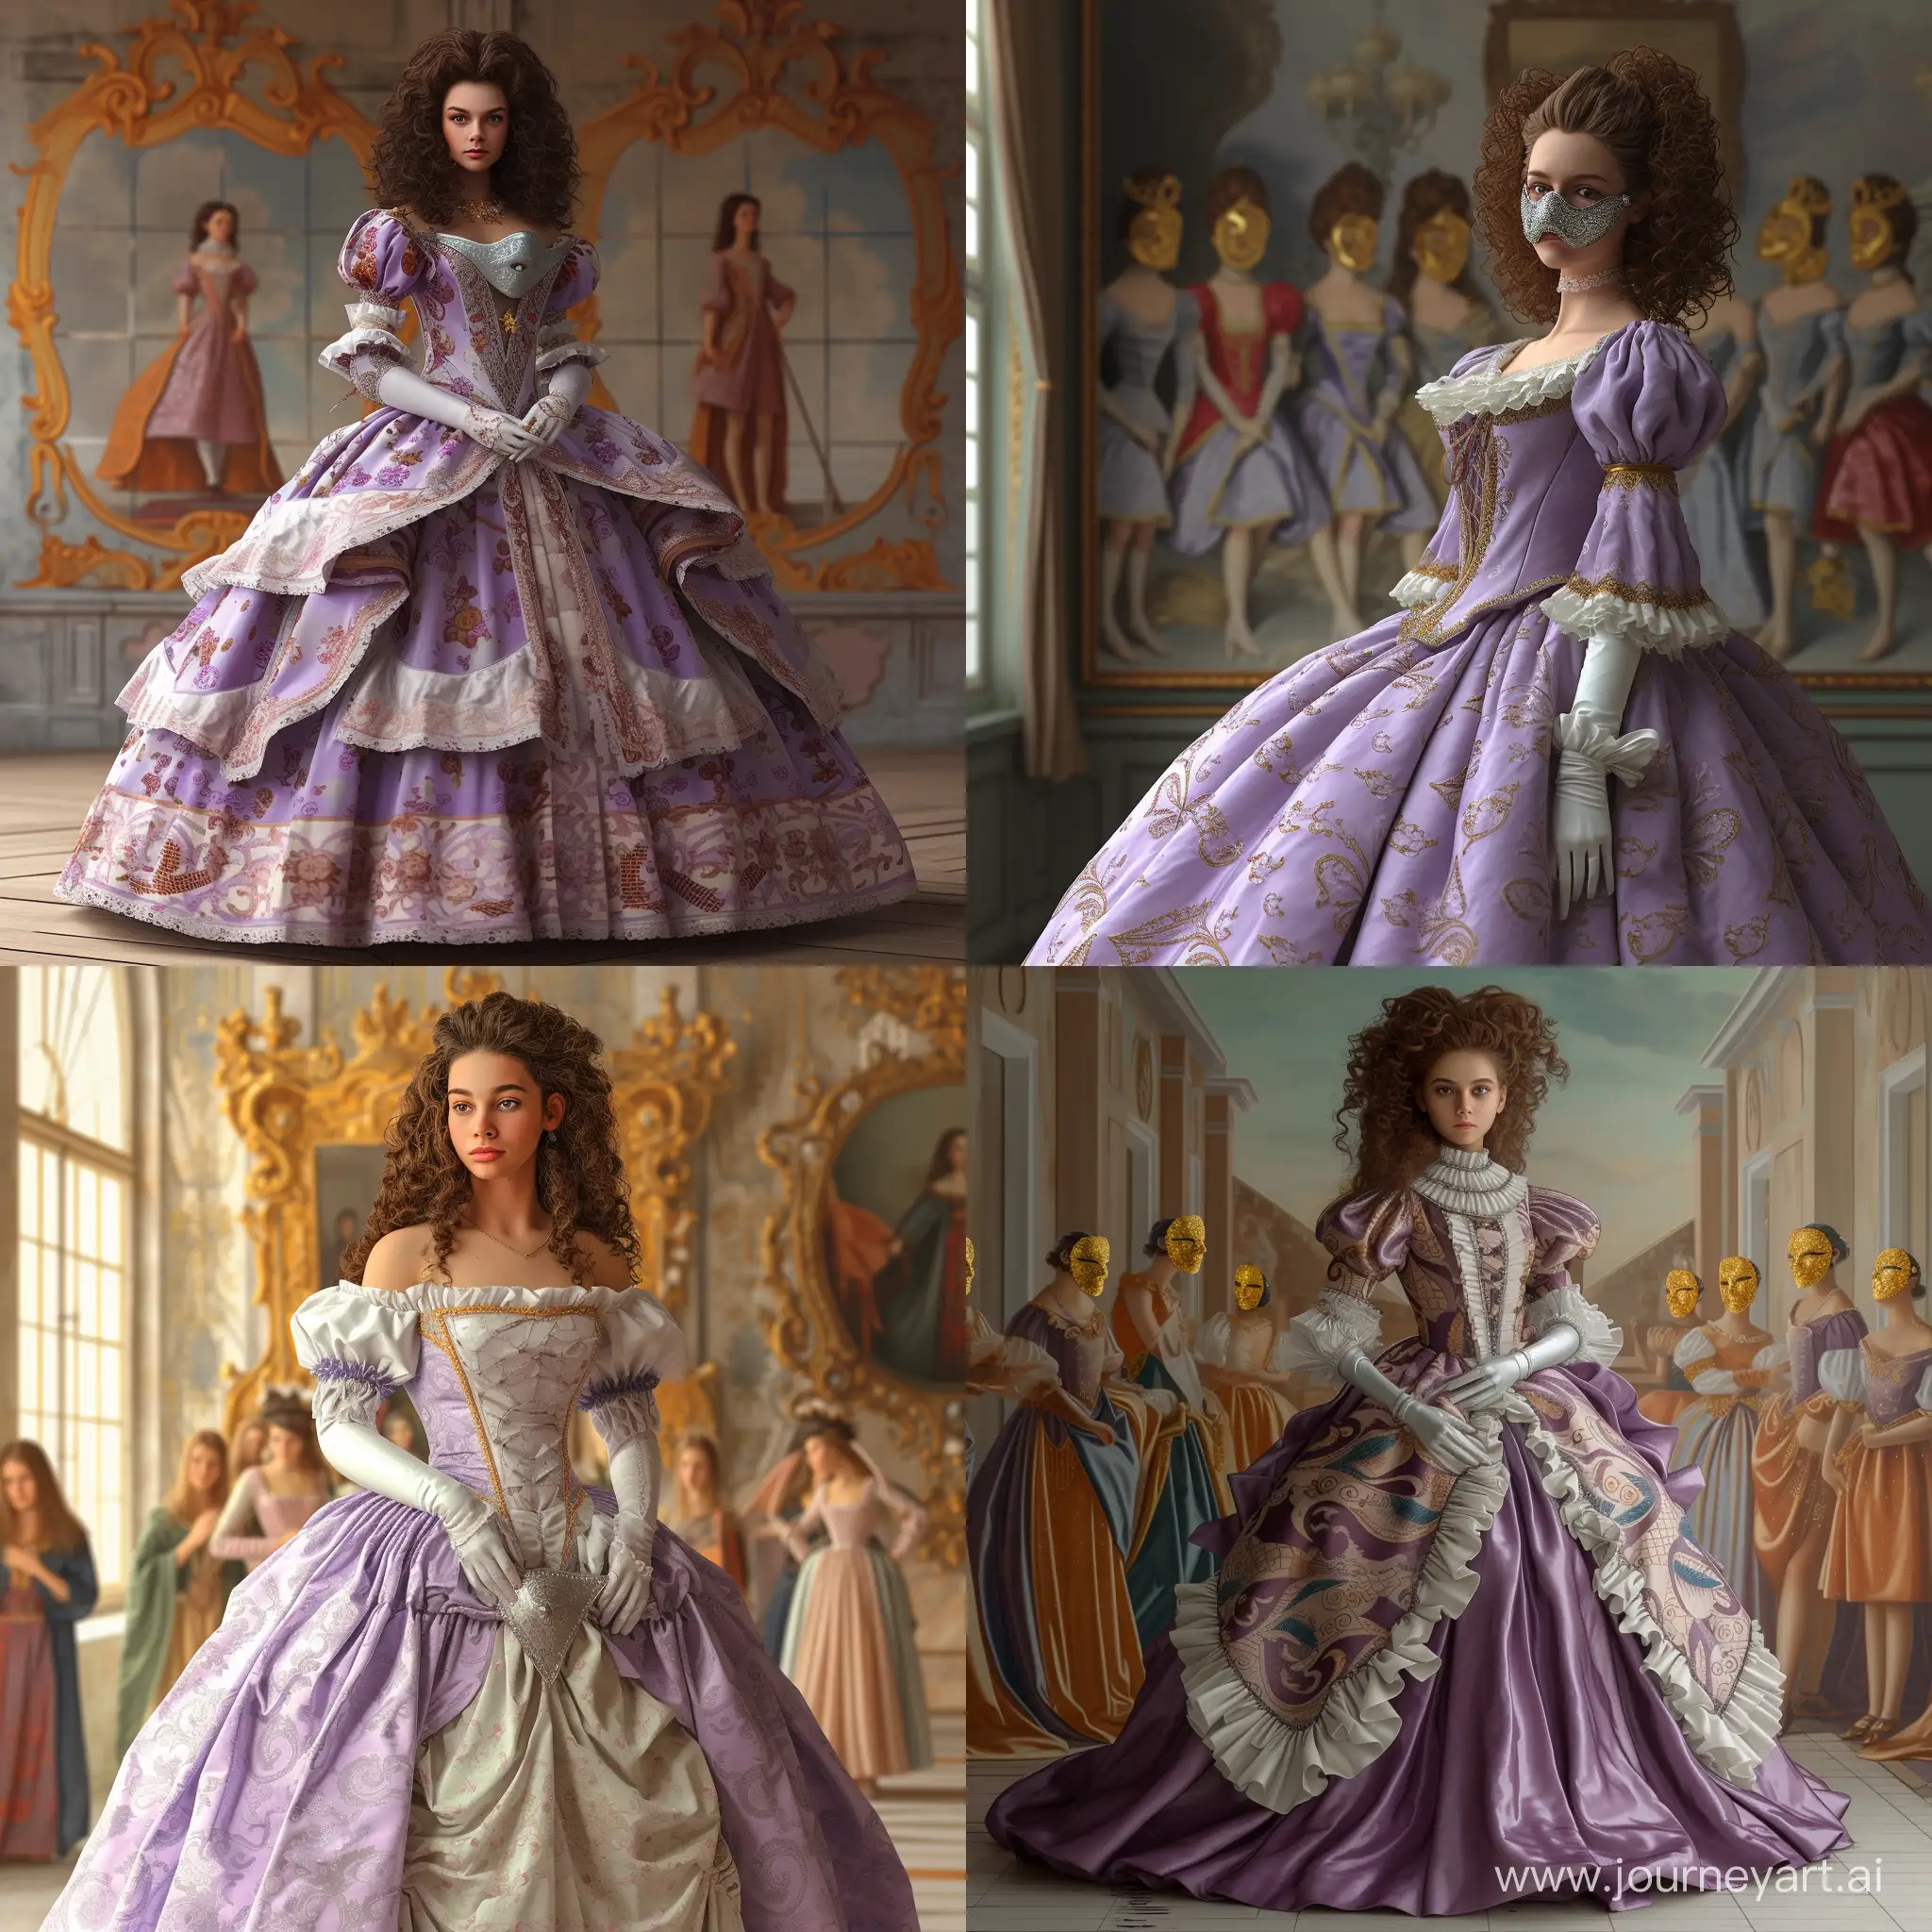 a very beautiful girl ((solo)) with brown curly hair, face and figure like Claudia Dean!!!!!!!!!!! She's wearing a lilac grand panier dress with a wide skirt and a pattern!!!!!!!!! and a silver mask hiding his face !!!!!!!mid-18th century, from the collection of the Victoria and Albert Museum. she stands tall against the background of the room, a very large detailed drawing in the form of five girls dressed in bright dresses and gold masks hiding their faces is visible on a wide skirt!!!!!!! and bright elbow - length gloves !!!!!!!! wide grand panier dress, huge dress, the most voluminous dress, princess, beautiful digital images, beautiful woman, beautiful woman, gorgeous and sweet, gorgeous, beautiful women, beauty, beautiful majestic digital art, queen, beautiful digital art, elegant digital painting, elegant digital art, perfect body, !front light, ((masterpiece)), ((best quality)), high detail, highest detail, ah, high detail, bright colors, HDR shooting, photorealistic, surrealism, ultra HD, realistic, bright colors, high detail, UHD drawing, , beautifully detailed, intricate, insanely detailed octane rendering trending on artstation, 8k art photography, photorealistic concept art, soft natural volumetric cinematic perfect light, , beautiful digital work, beautiful fantasy girl, Karol Buck uhd, beautiful fabulous rendering, beautiful magnificent digital art, beautiful UHD art 4k, stunning digital illustration, highly detailed 4k digital art, magnificent digital art, exquisite digital illustration, beautiful digital illustration